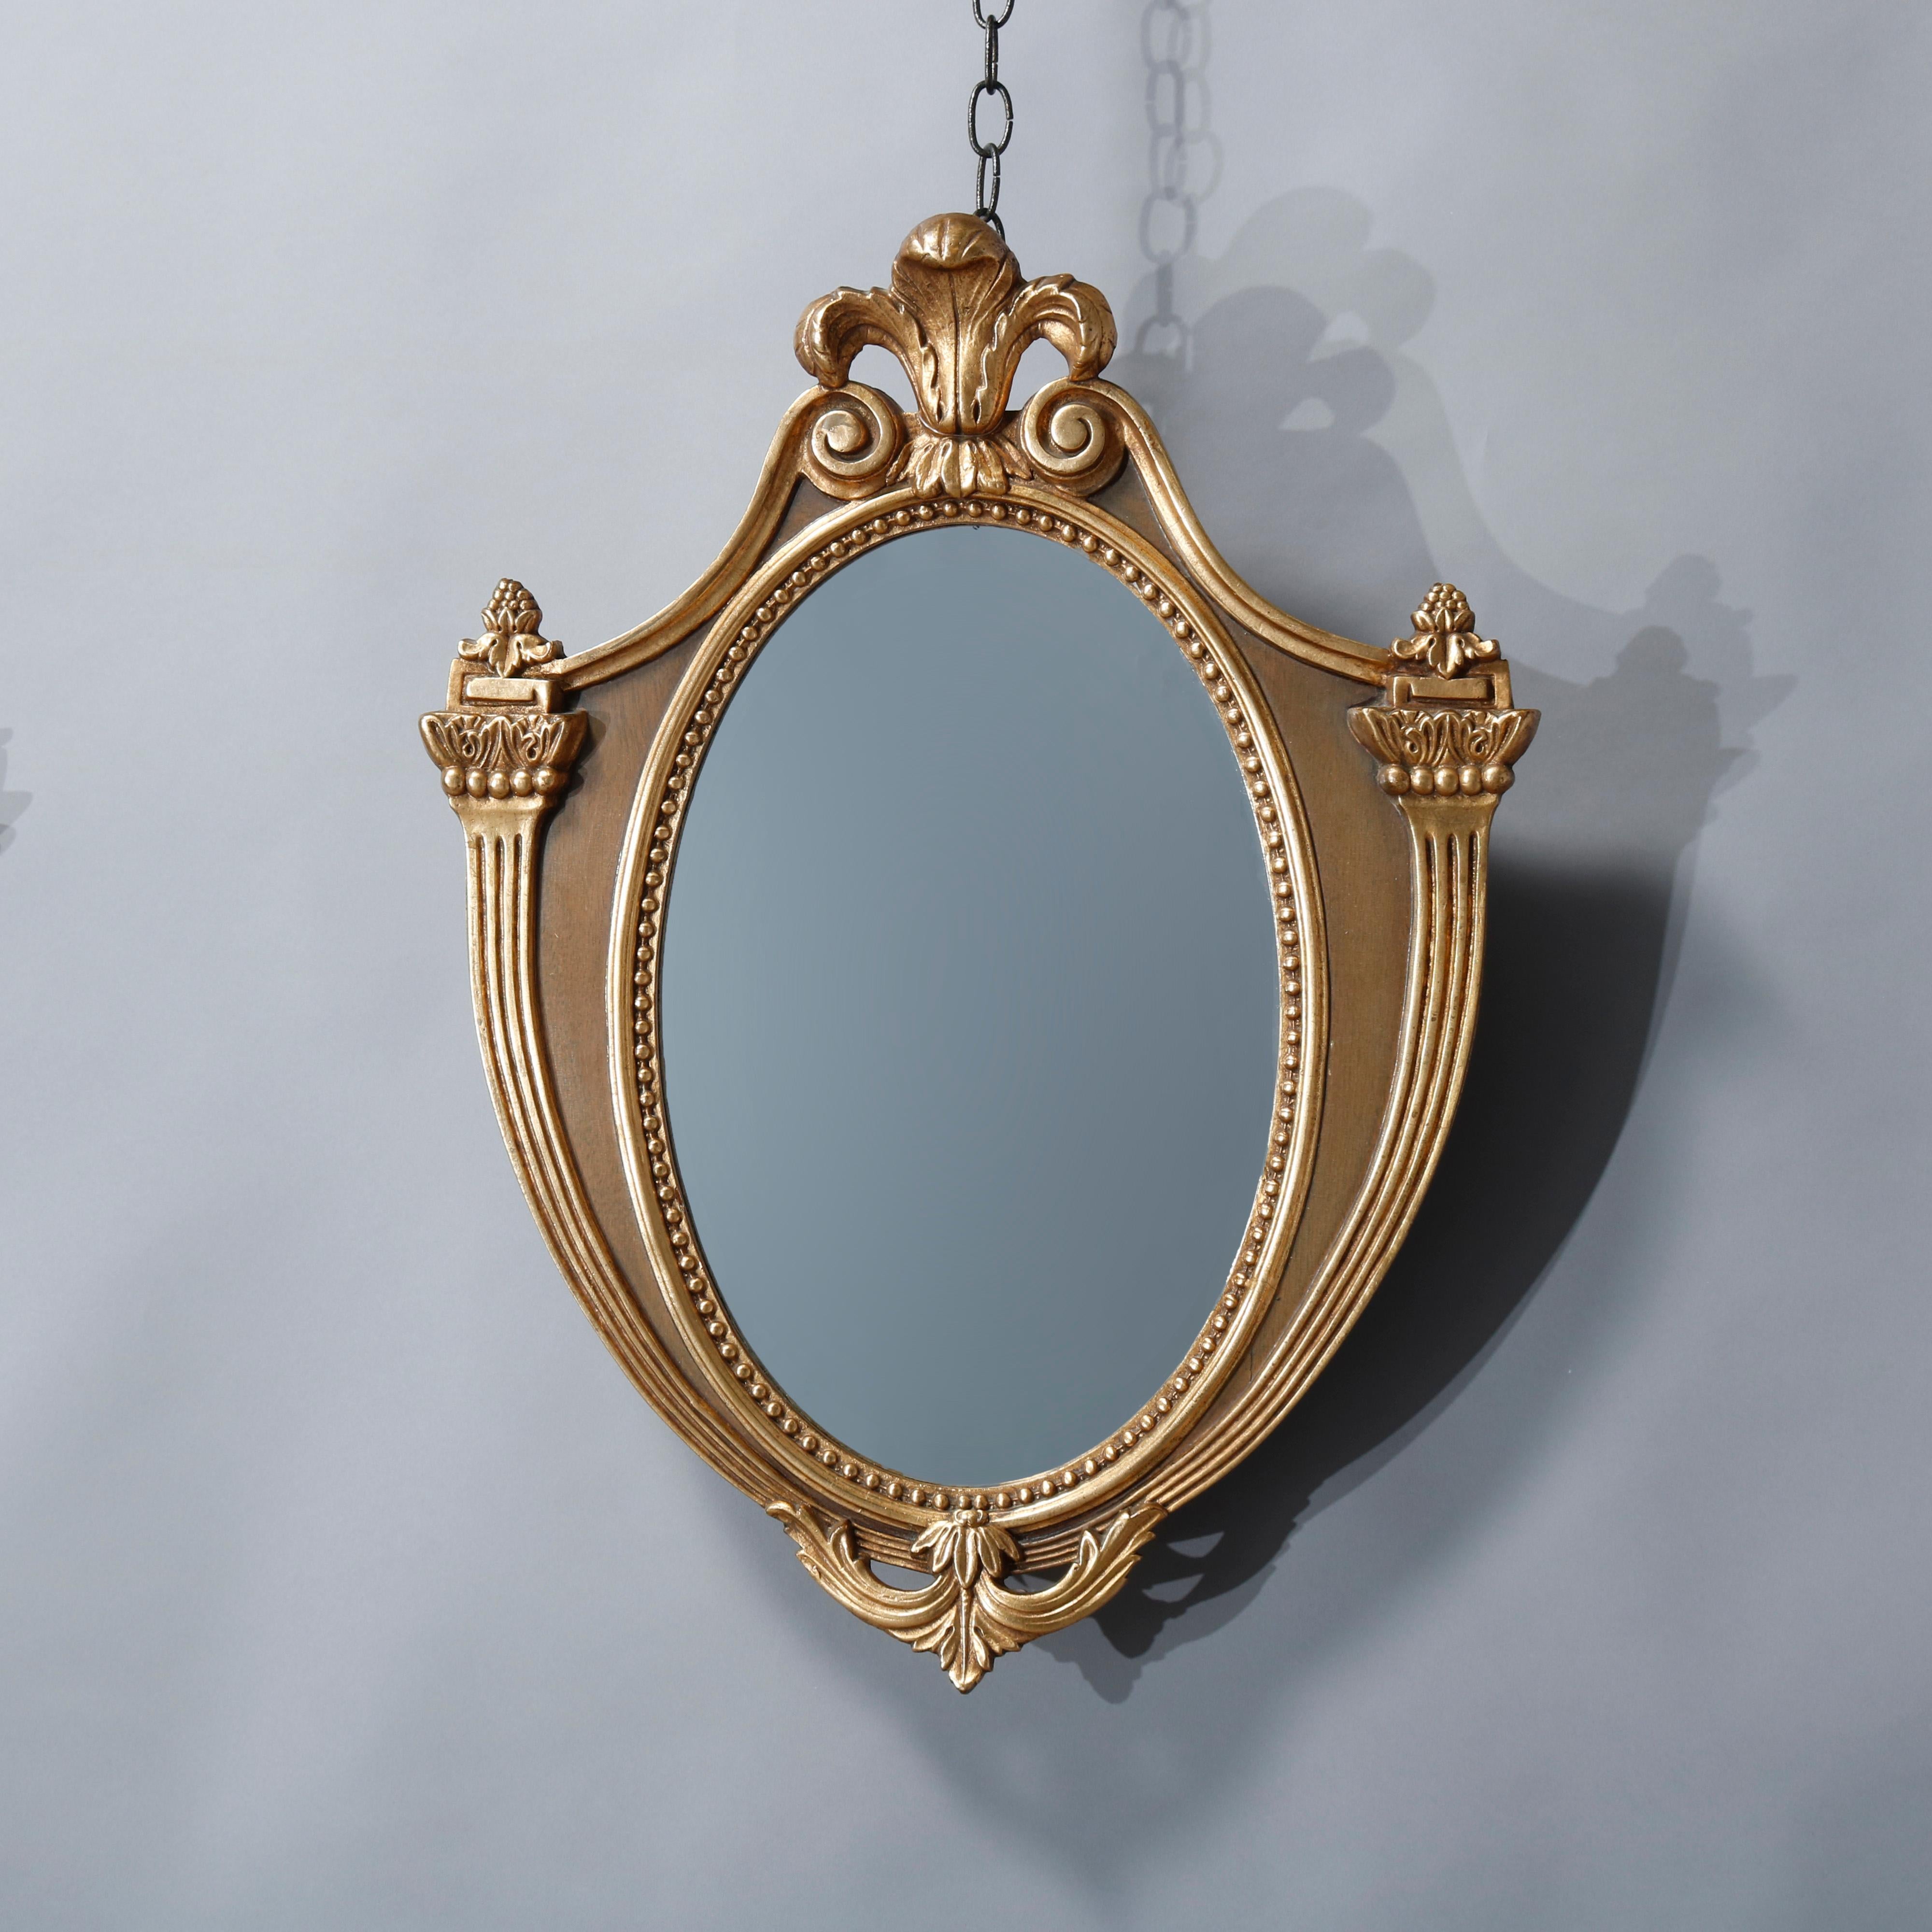 A vintage pair of French wall mirrors offer parcel-gilt mahogany frames in shield form with Fleur-de-Lis crest, beaded bordering, foliate elements and flanking stylized torchieres, circa 1940.

Measures: 26